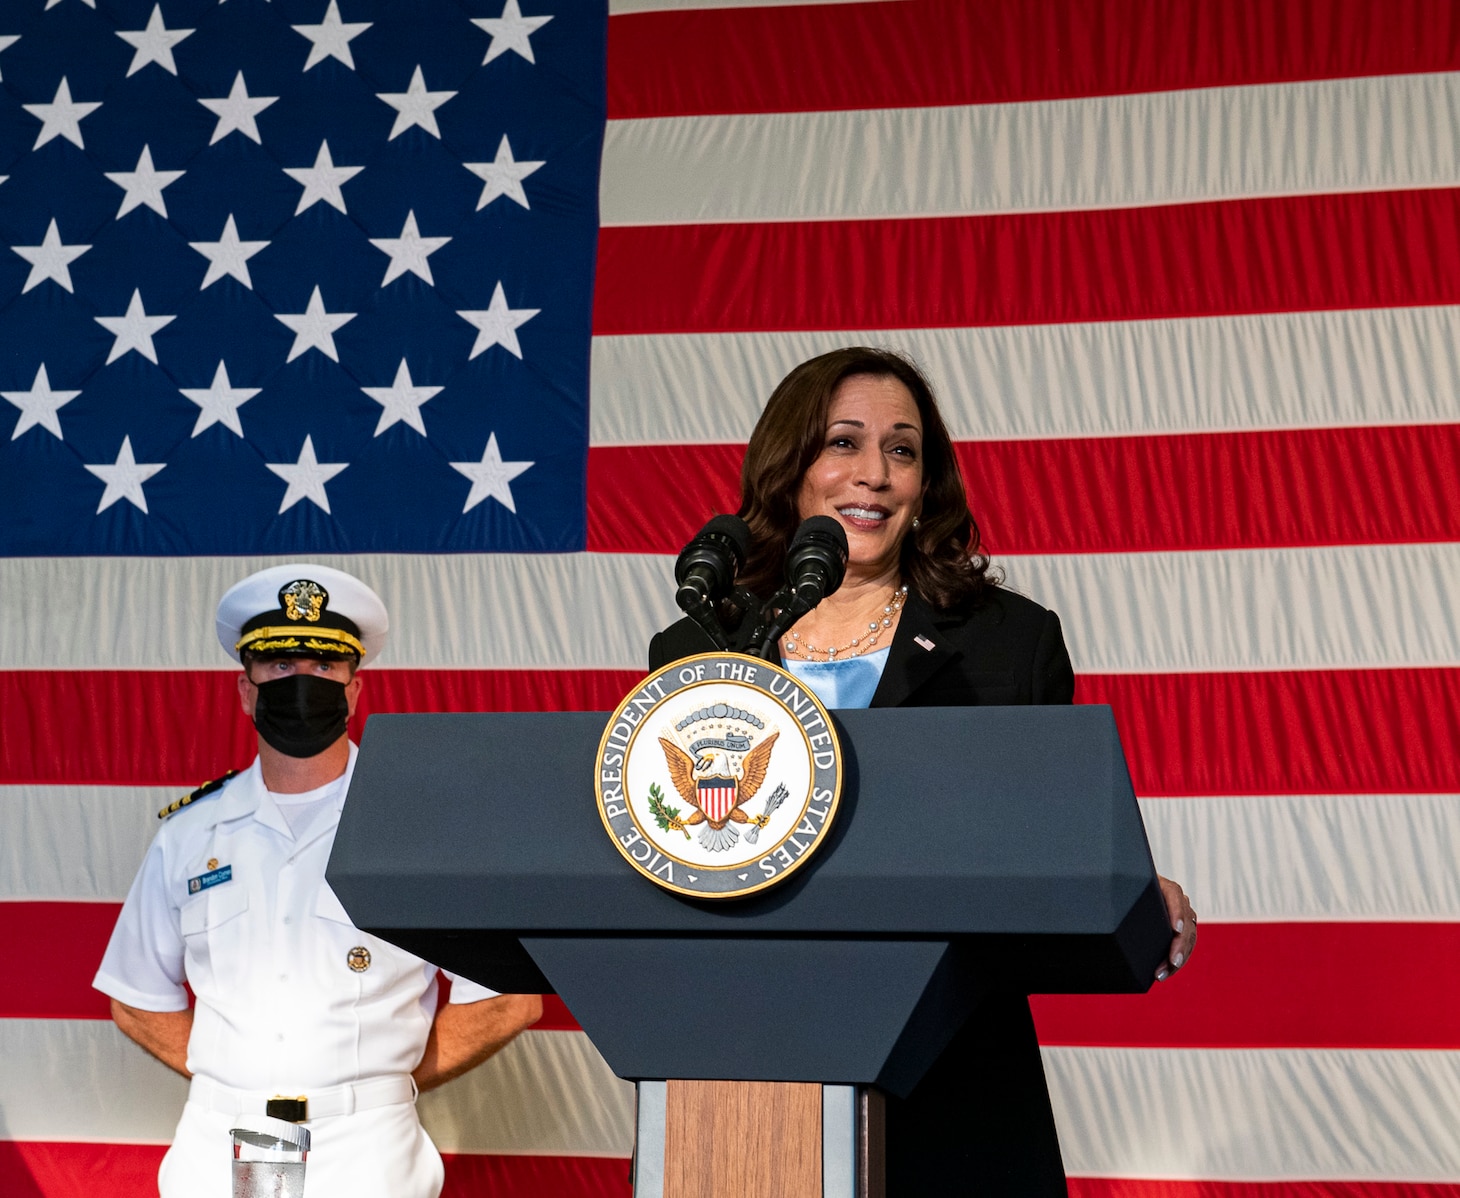 SINGAPORE (AUG. 23, 2021) Vice President Kamala Harris addresses the crew of the Independence-variant littoral combat ship USS Tulsa (LCS 16) during an all-hands call, Aug. 23, 2021. Tulsa, part of Destroyer Squadron Seven, is on a rotational deployment in the U.S. 7th Fleet area of operation to enhance interoperability with partners and serve as a ready-response force in support of a free and open Indo-Pacific region.